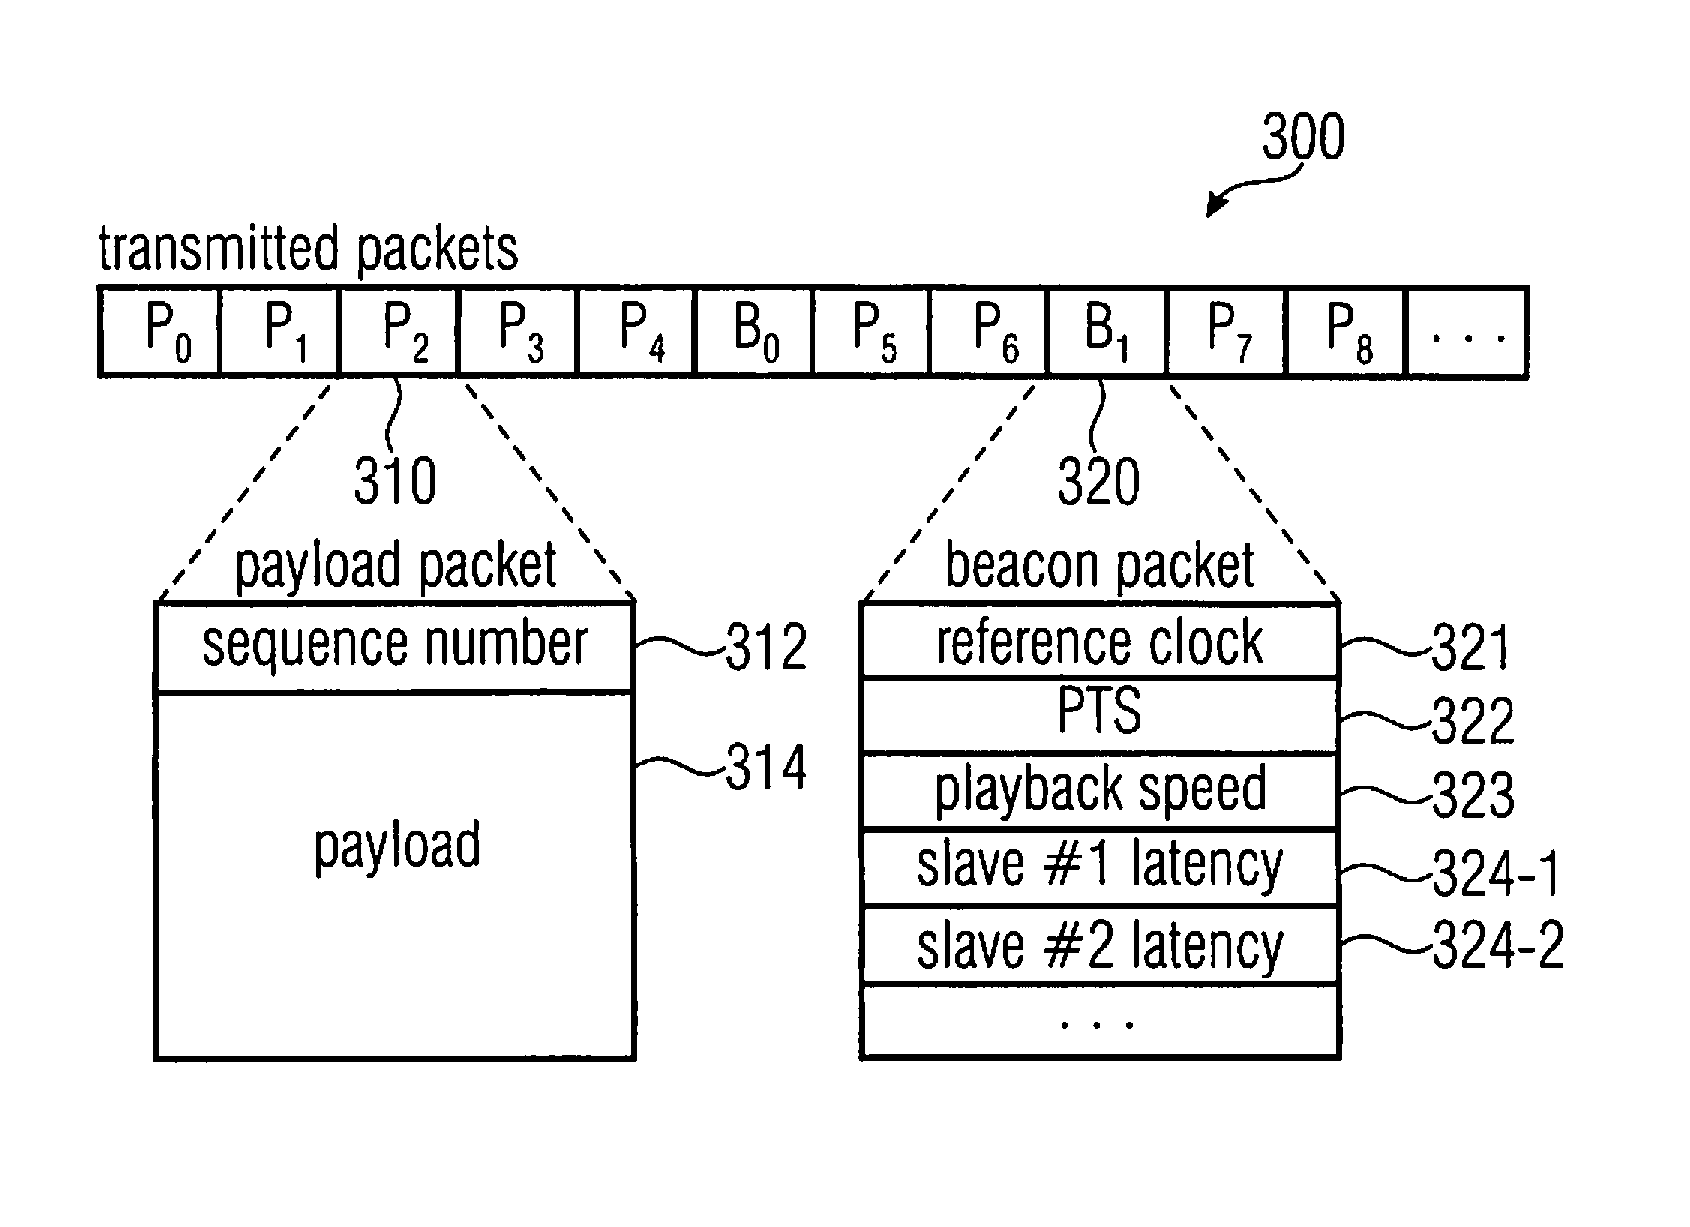 Distributed playback architecture